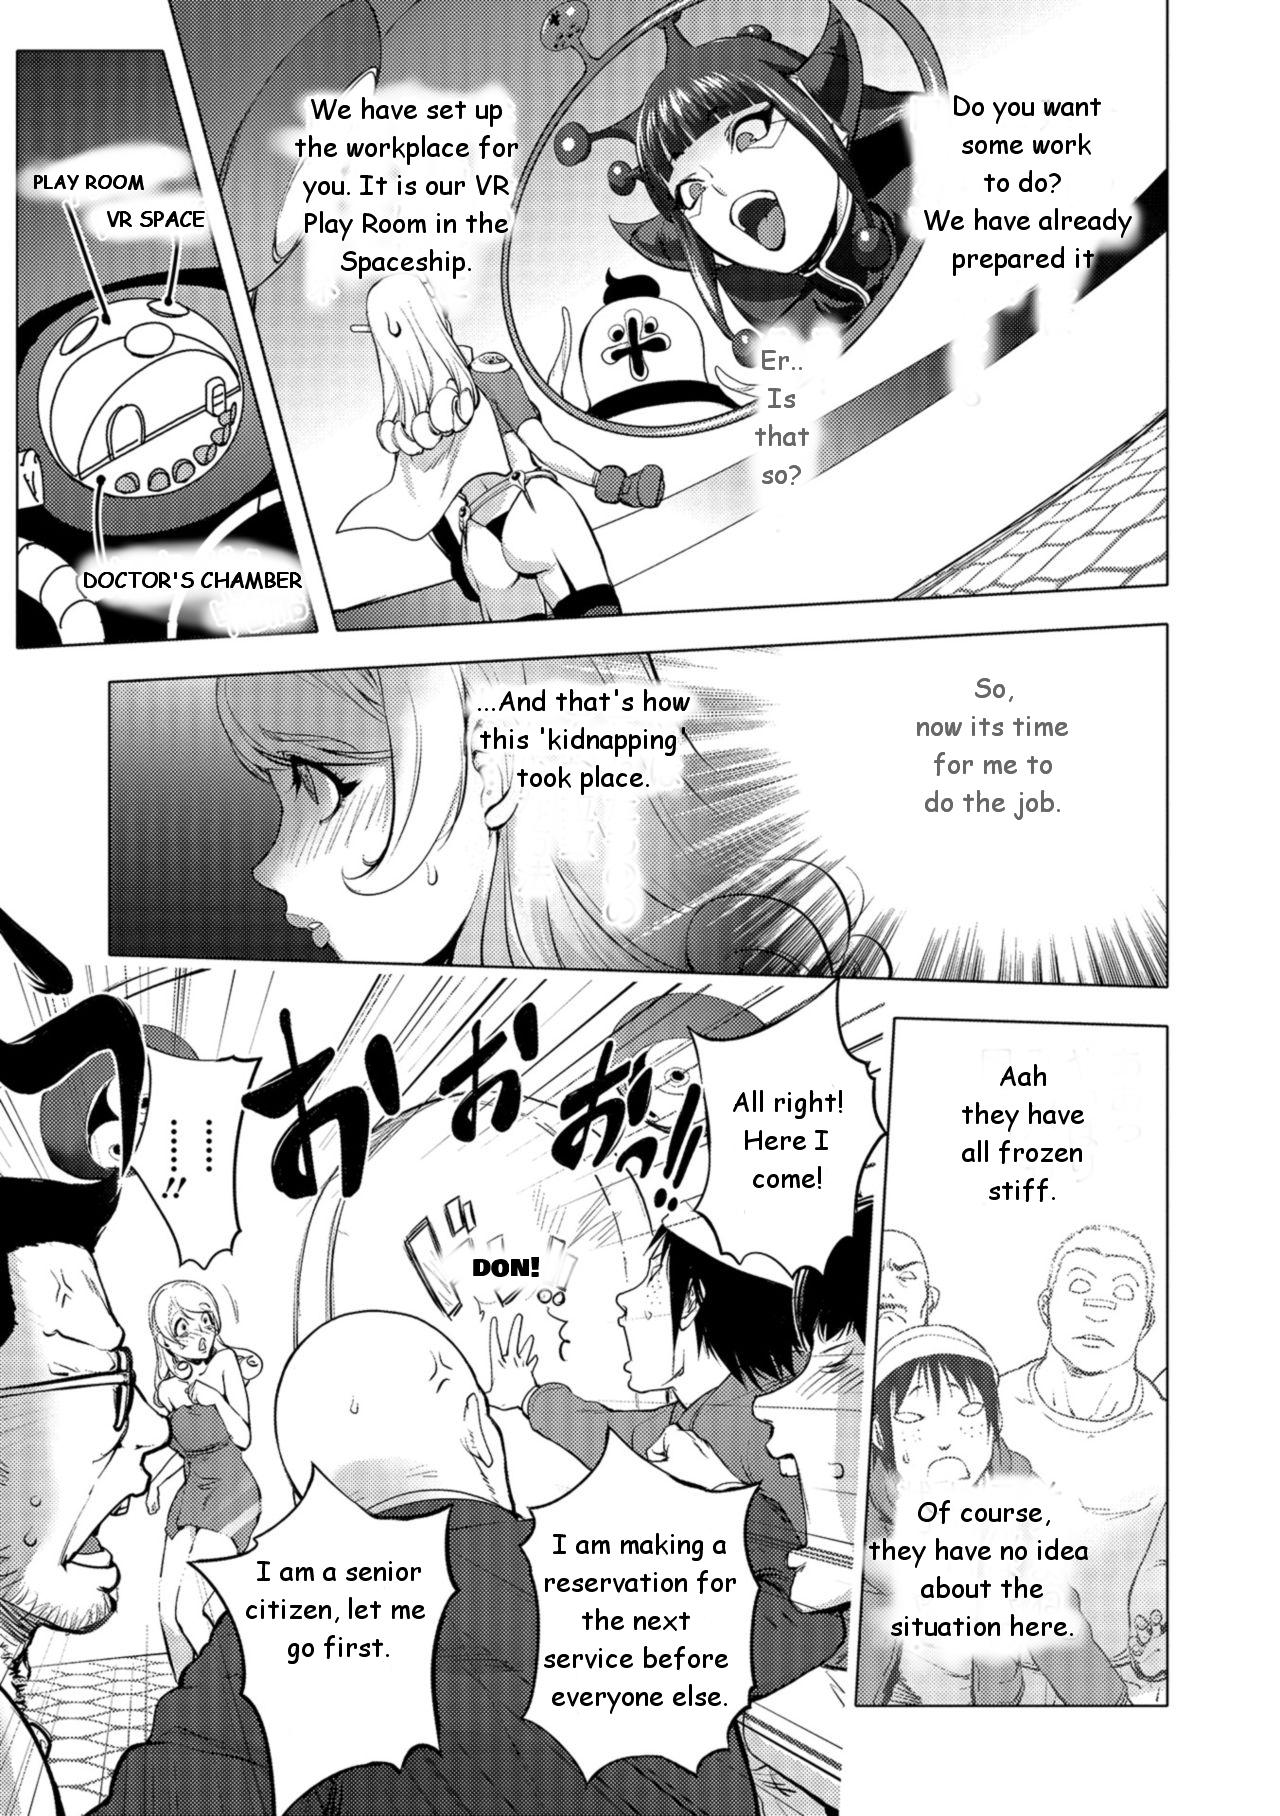 Gym [Kon-kit] Aisai Senshi Mighty Wife-13th | Love Service Overtime Work - Part-1 Job - Page 7